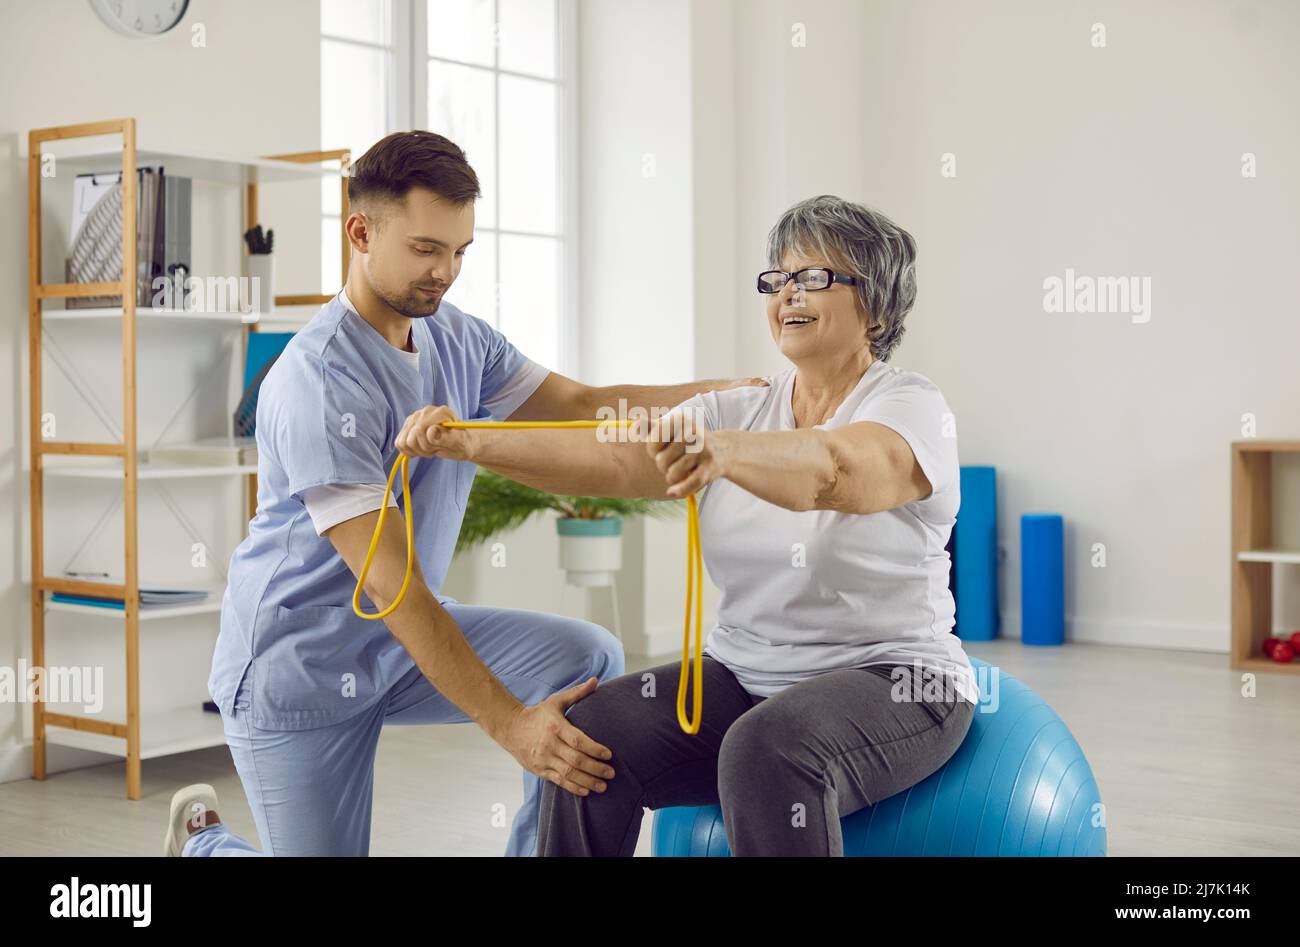 Physiotherapist helping senior woman with osteoporosis to do exercises on fitball Stock Photo